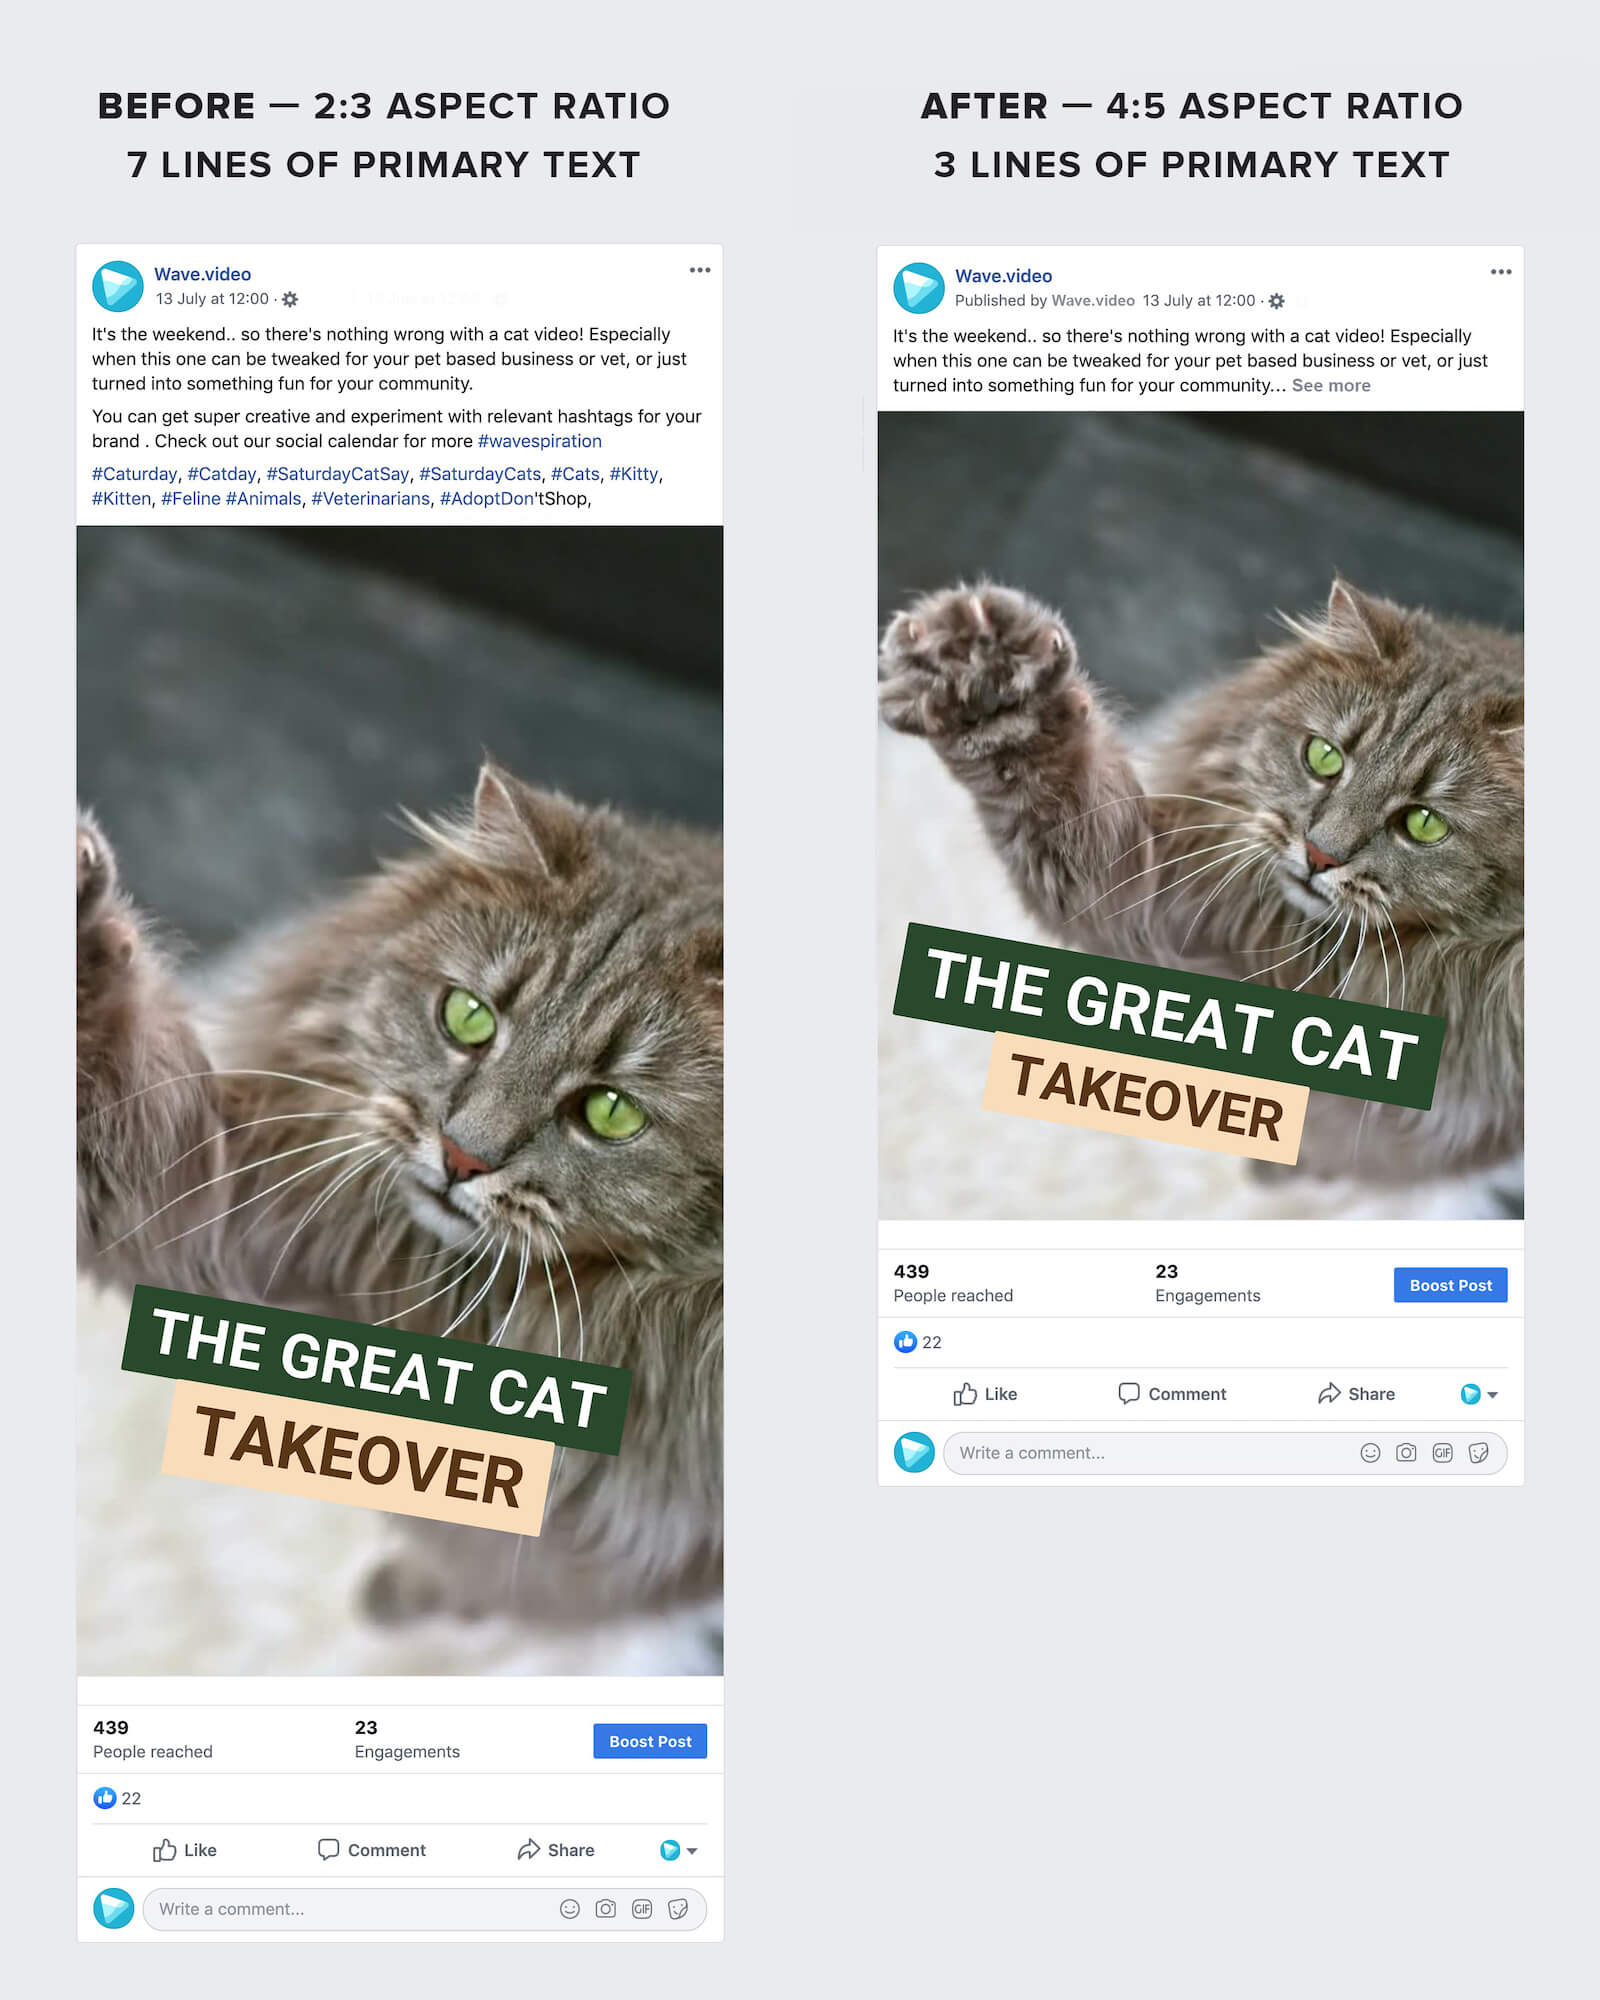 Facebook Is Changing Its Ad Format. What Does It Mean for Marketers? - Wave. video Blog: Latest Video Marketing Tips & News 